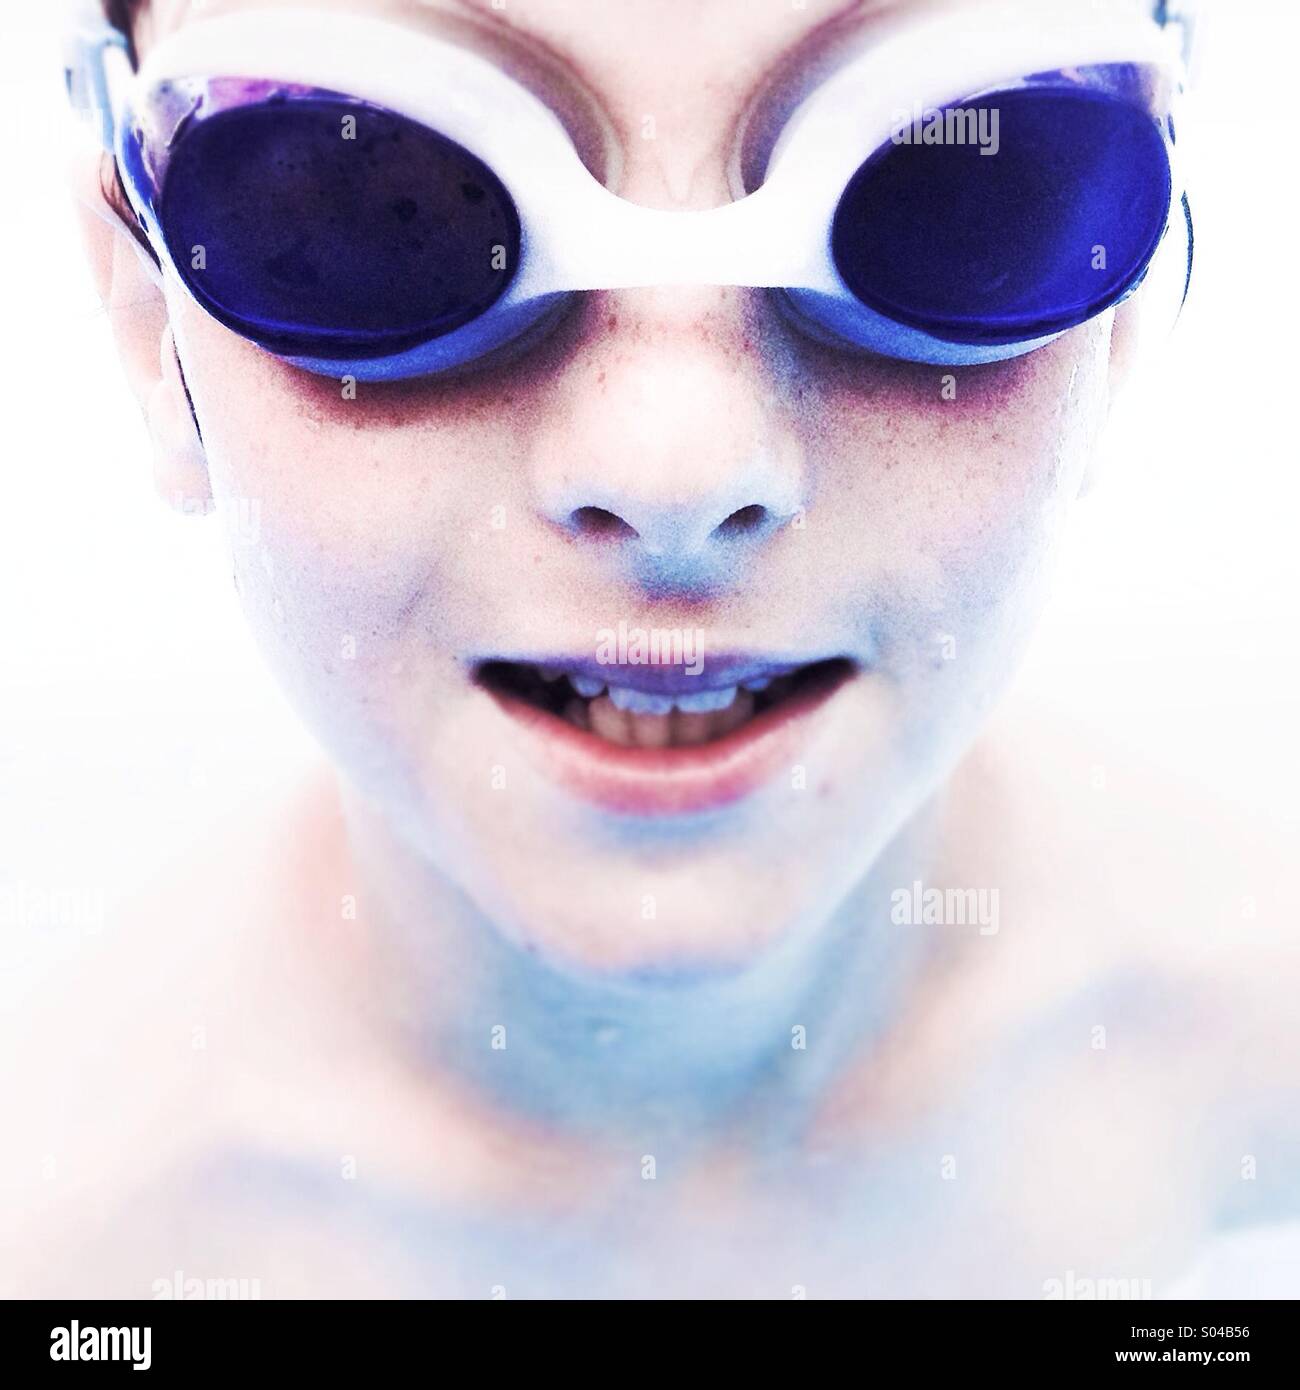 Happy smiling boy with goggles Stock Photo